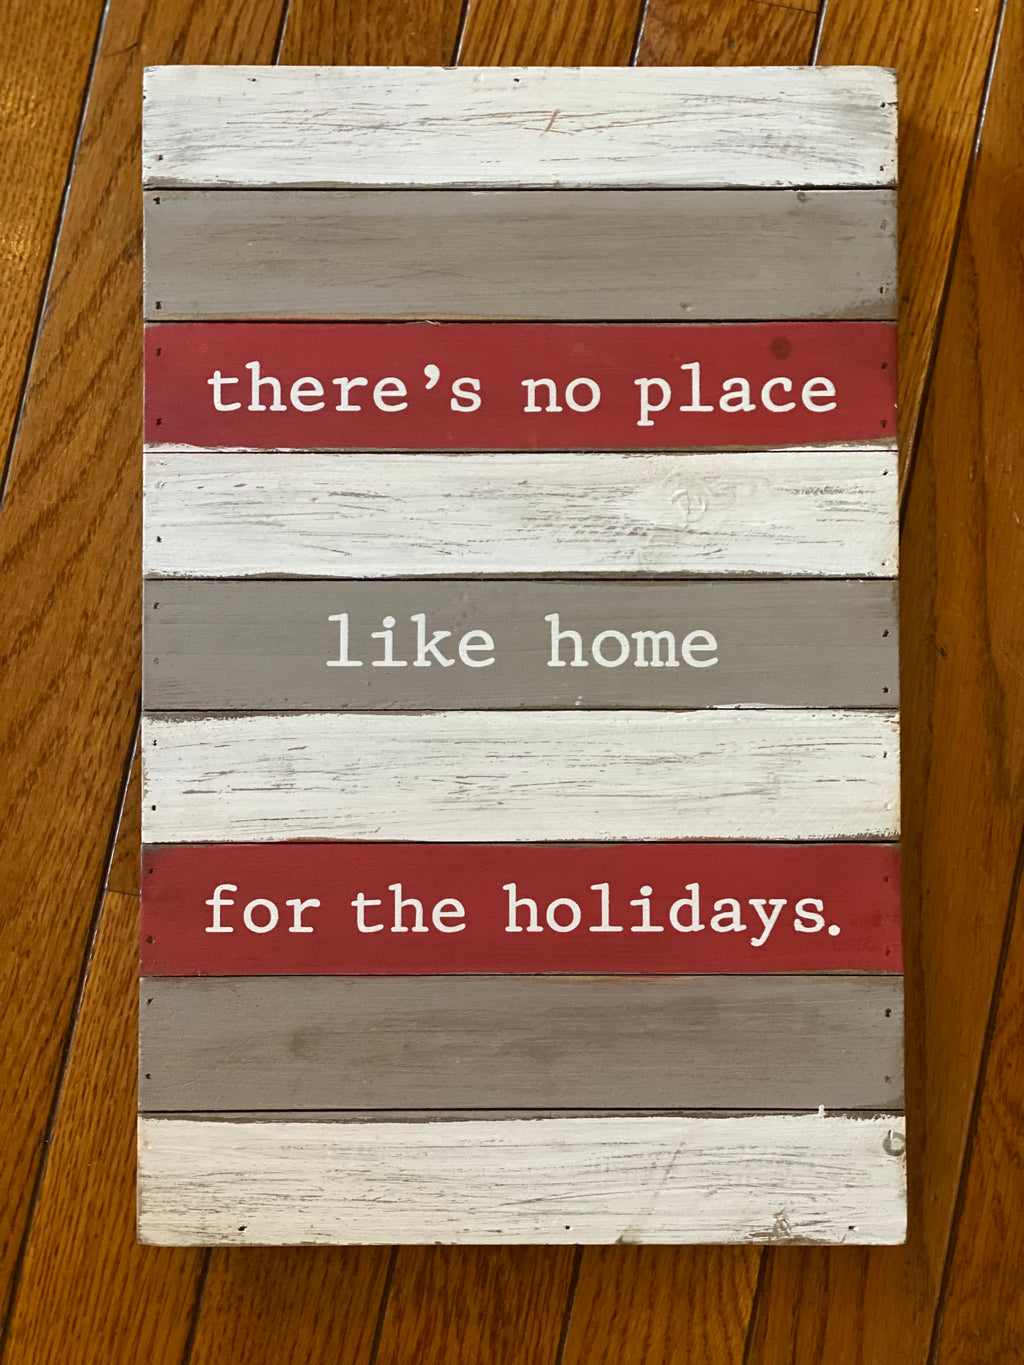 There’s no place like home for the holidays sign